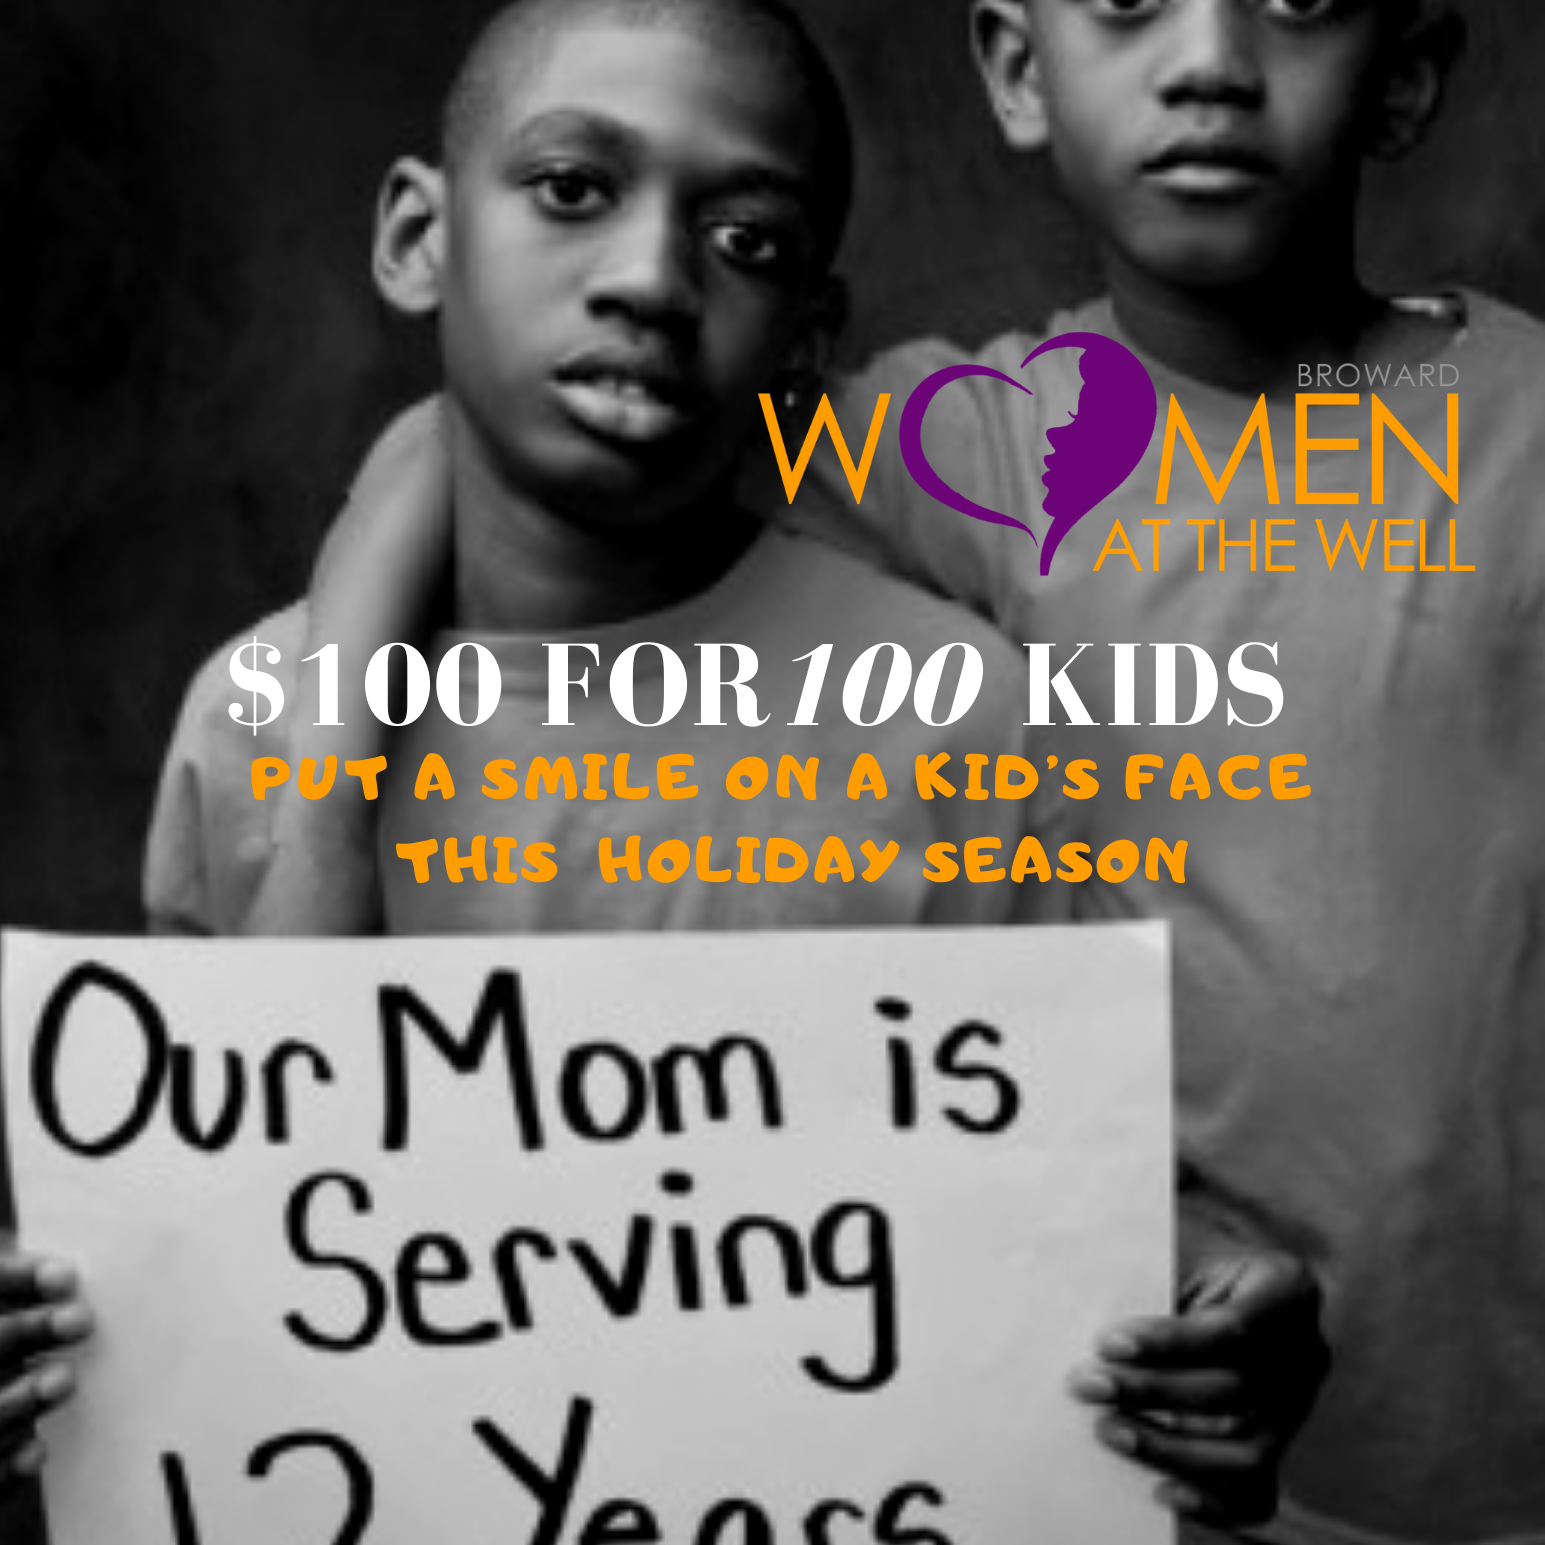 Children of Incarcerated Mothers